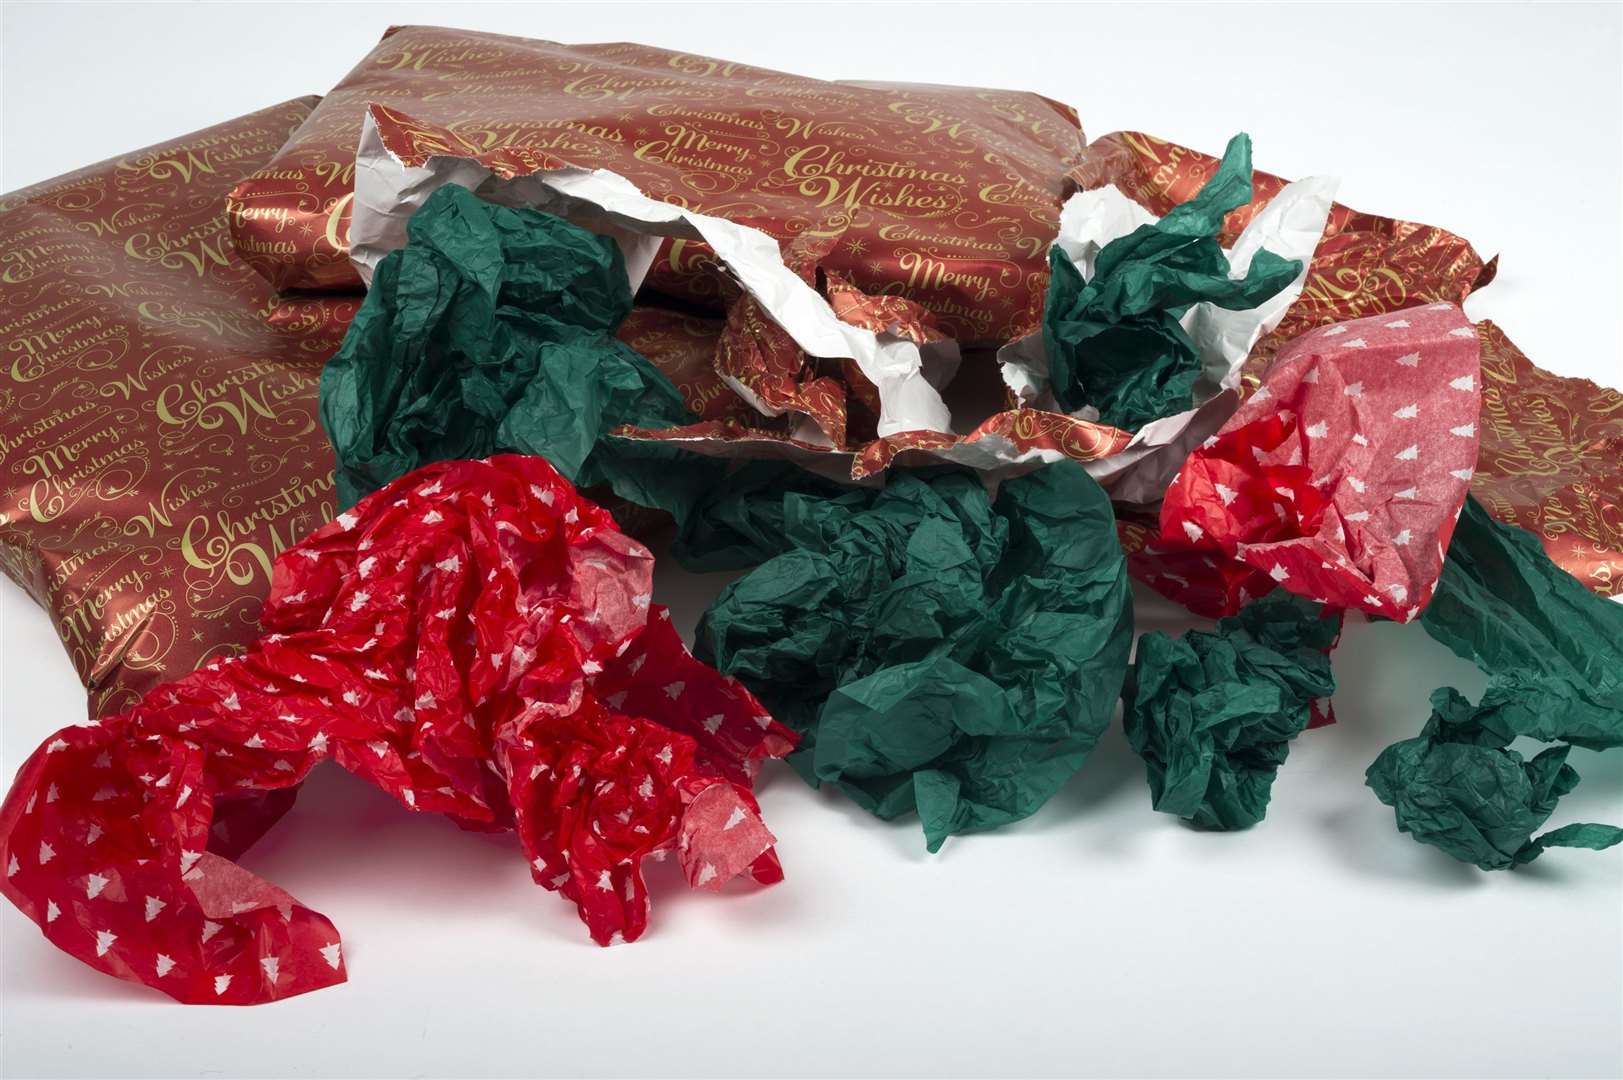 Many items of wrapping can be included in domestic recycling.